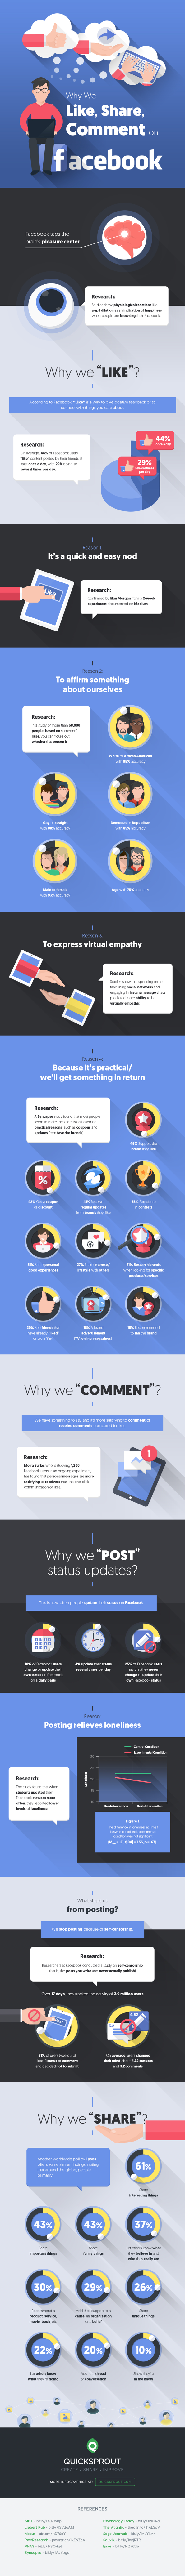 The Habits of Facebook Users: Why They Like, Comment and Share Infographic image